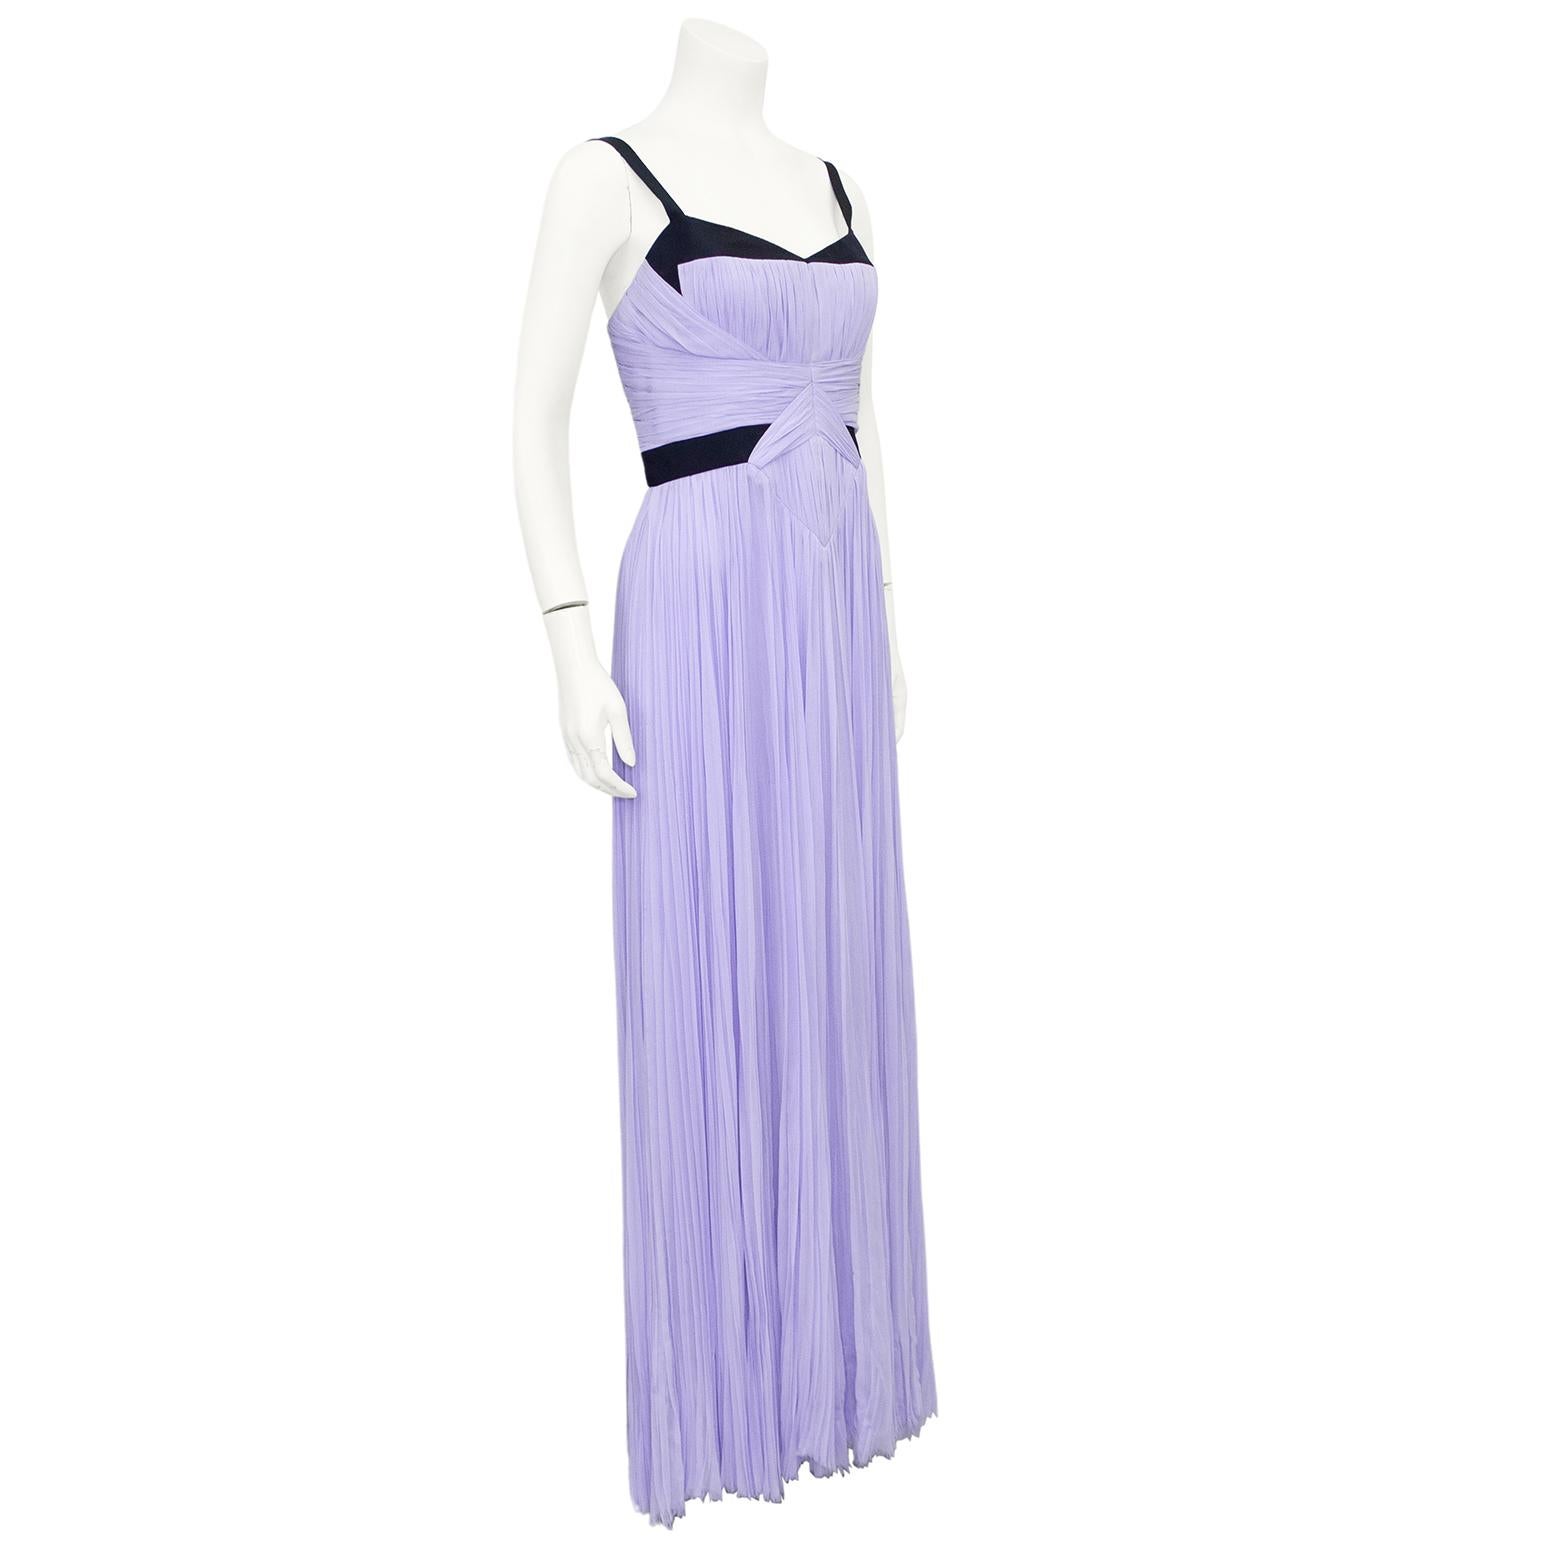 This J. Mendel evening gown from the mid 2000s is absolutely stunning. Micro pleated lilac silk chiffon with contrasting black silk twill ribbon colour blocking. Spaghetti straps with a very slight v neck line. Fitted through the waist with a